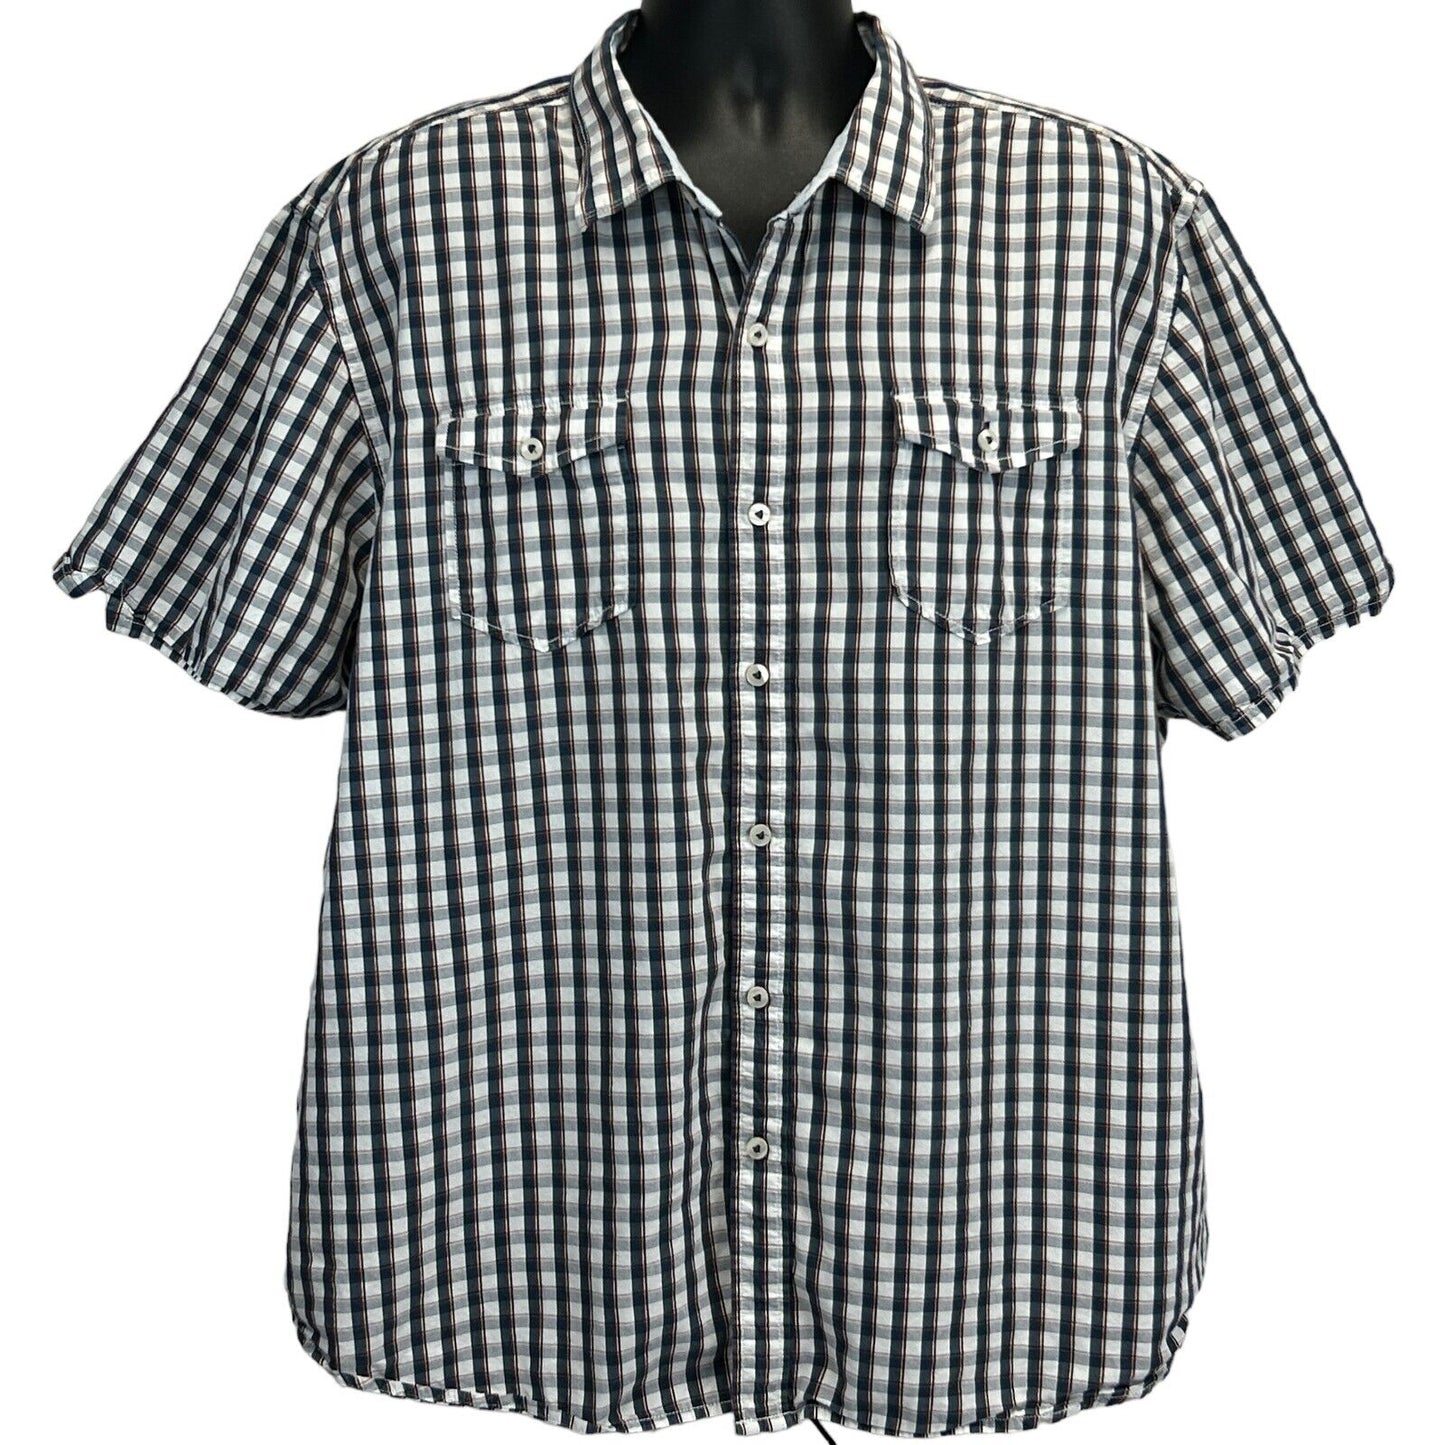 Tommy Bahama Jeans Button Front Shirt Plaid Checkered Cotton Short Sleeve 2XL